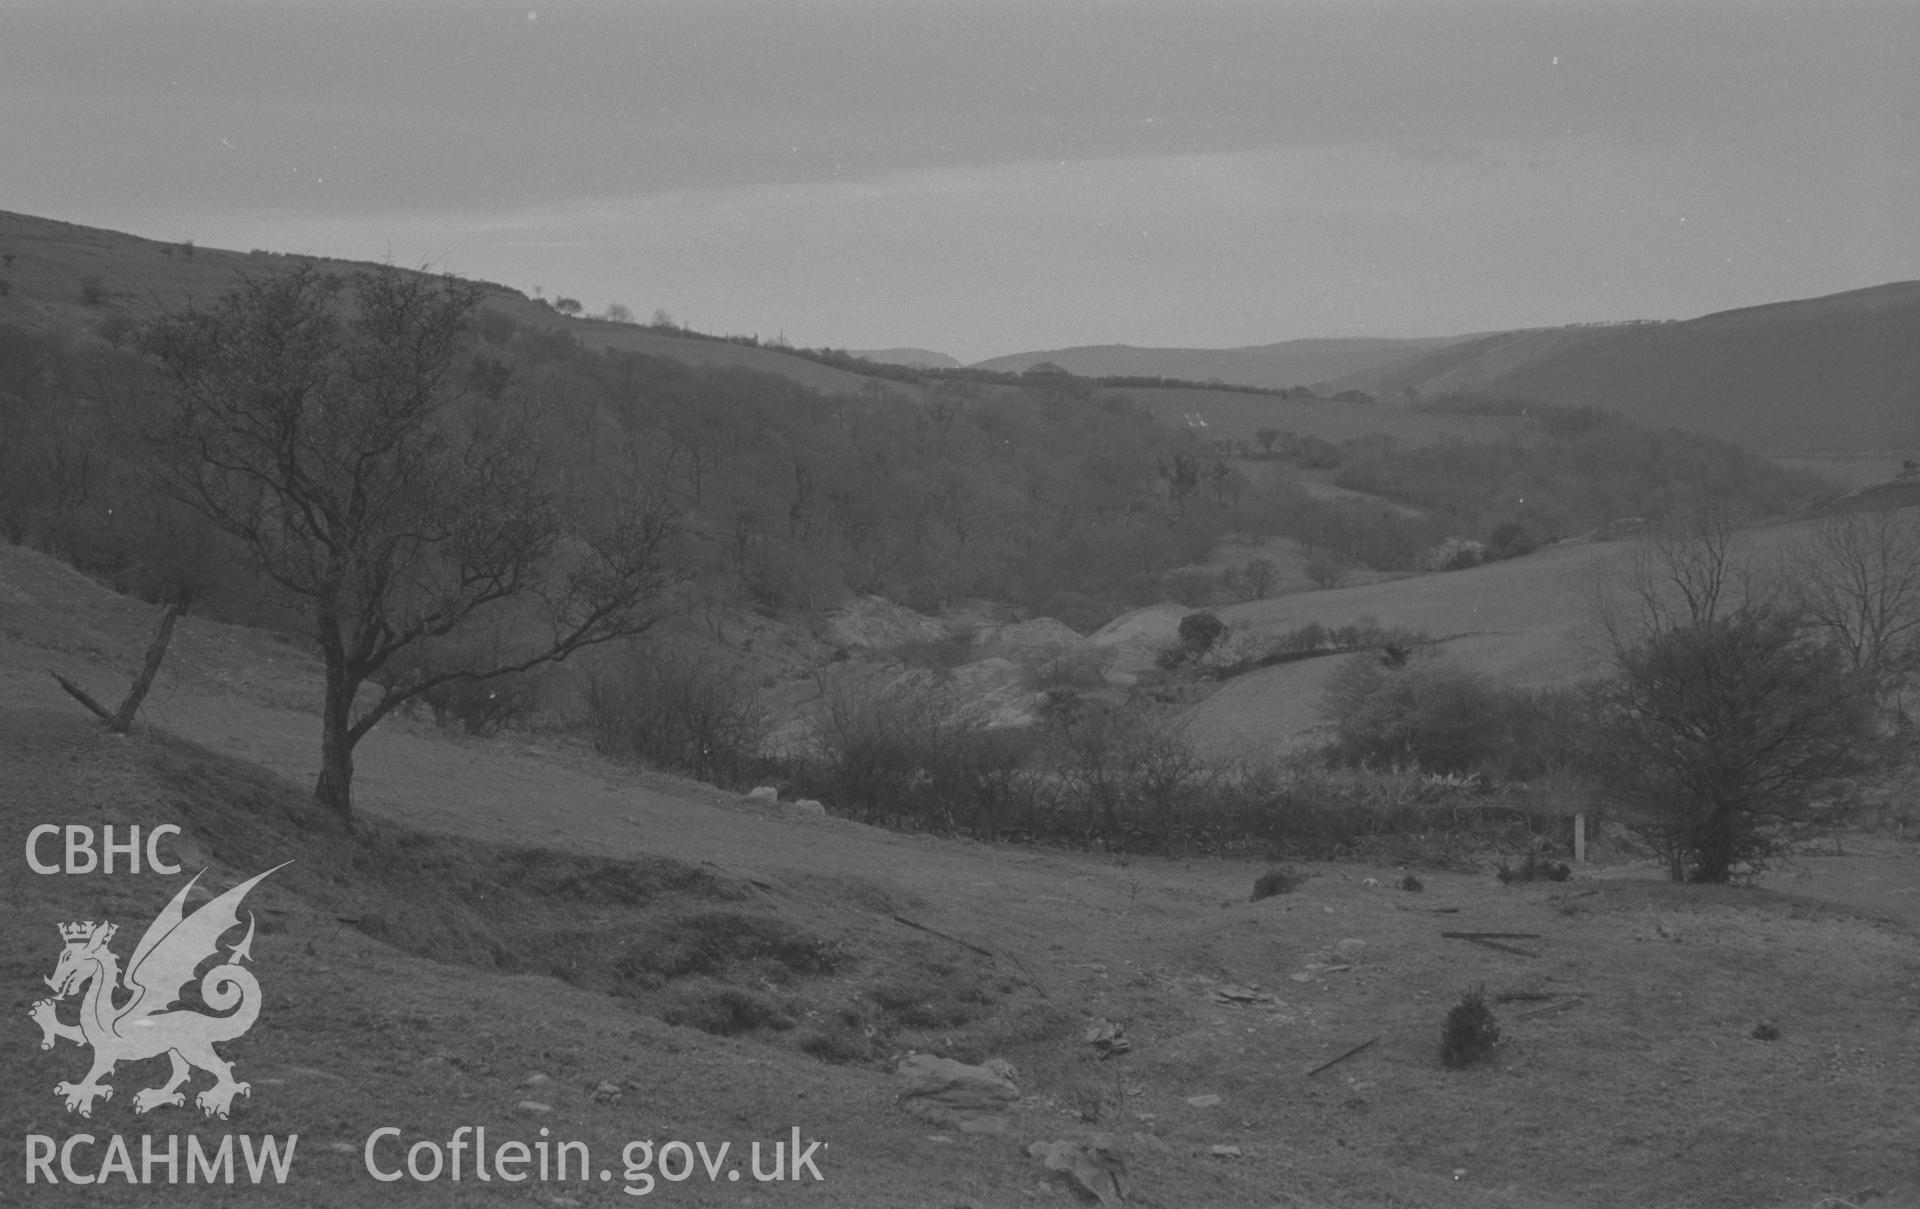 Black and White photograph showing view down the valley to Llechwedd-Helyg lead mine remains. Photographed by Arthut Chater in December 1961, from Grid Reference SN 686 849, looking east.